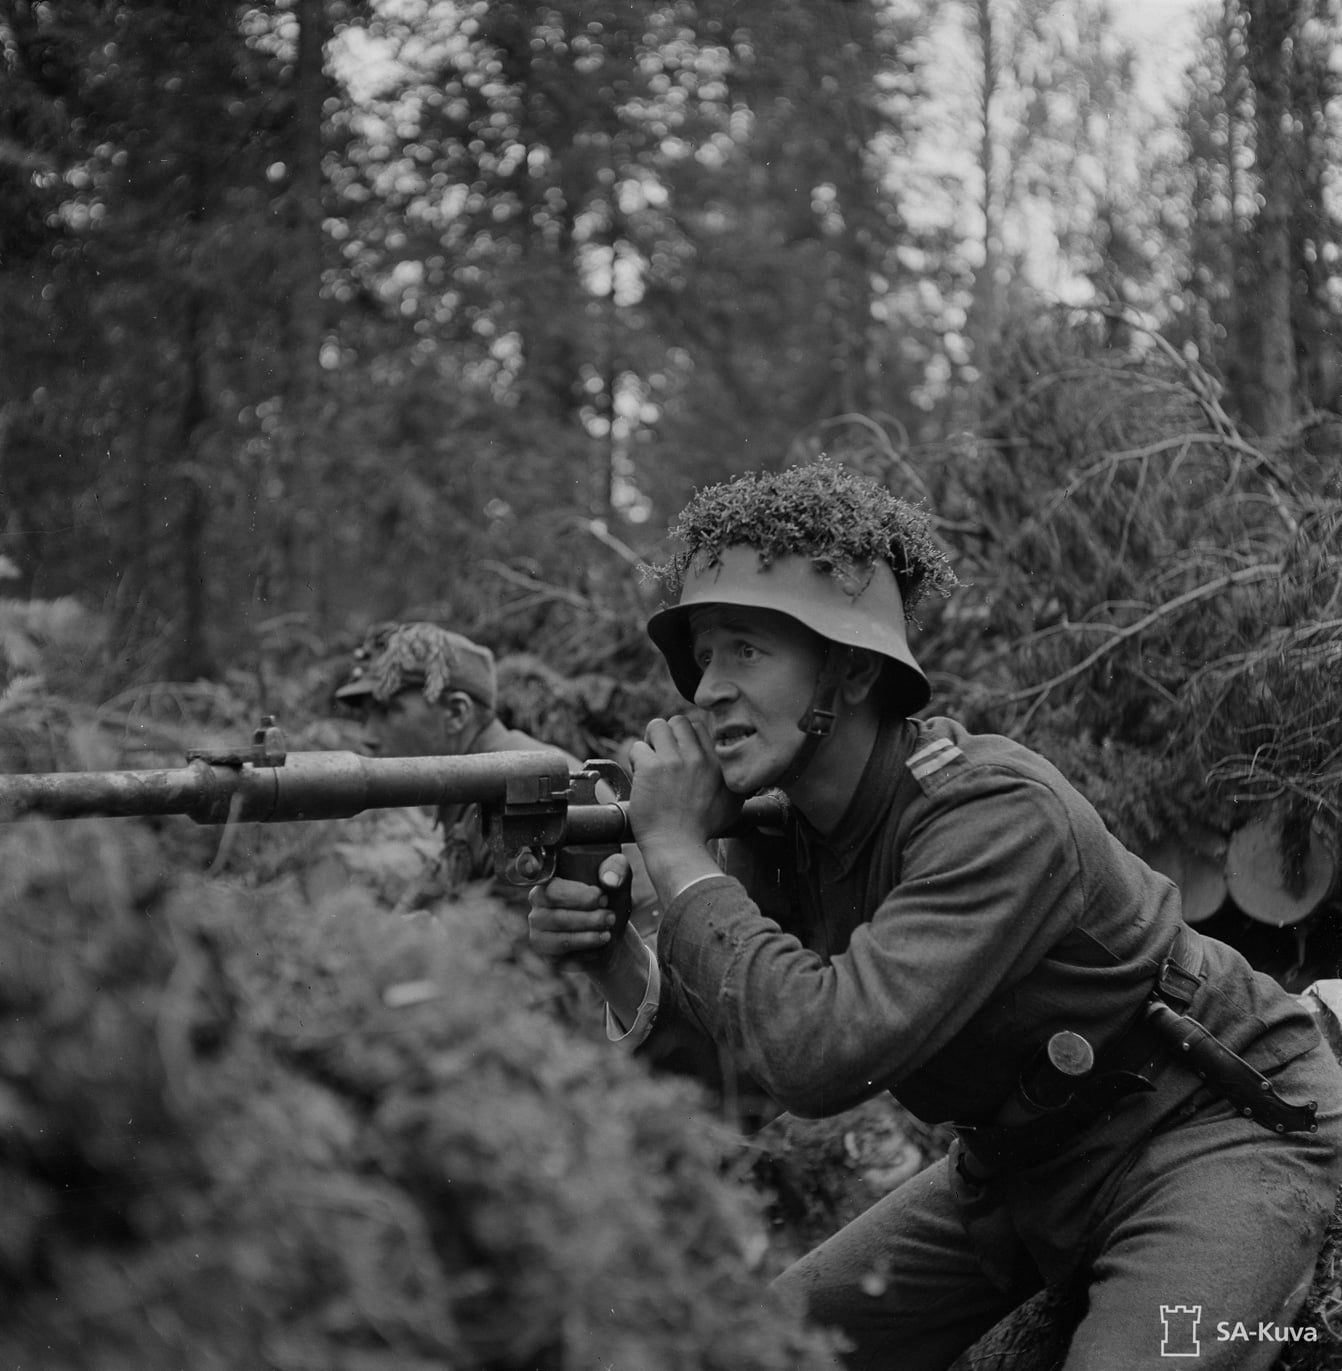 finnish soldier uses soviet ptrd-41 against russian troops